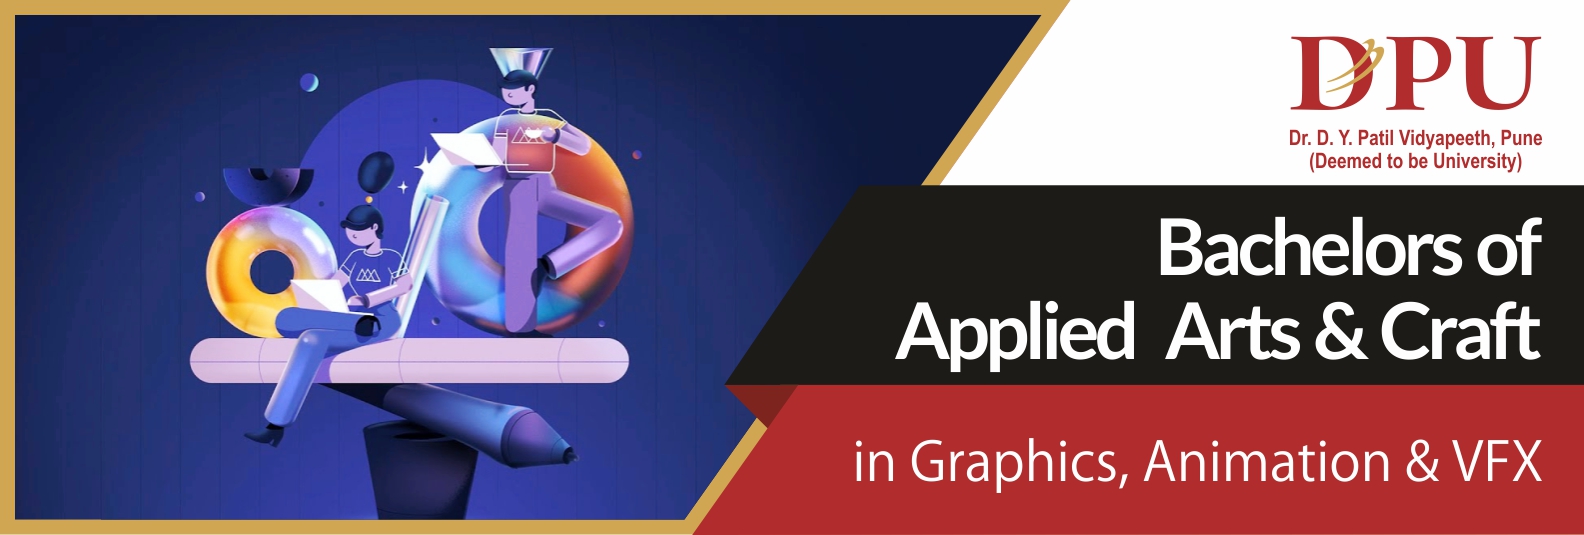 Bachelors of Applied Arts & Craft in Graphic Design & Animation / VFX